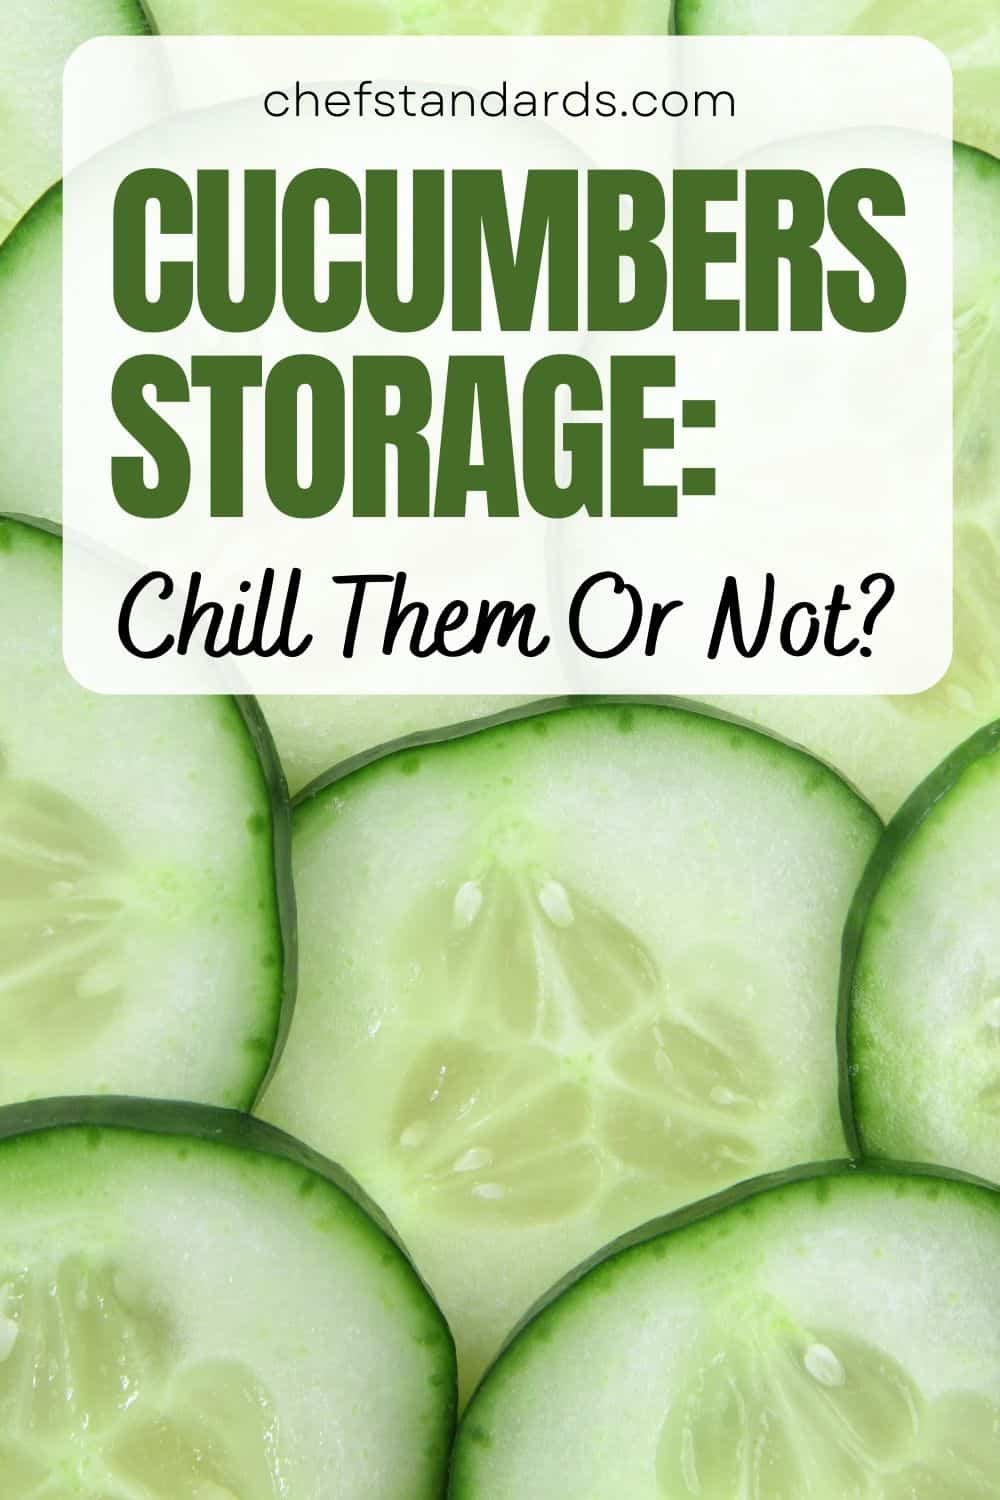 Do Cucumbers Need To Be Refrigerated (Storage Guidelines)
